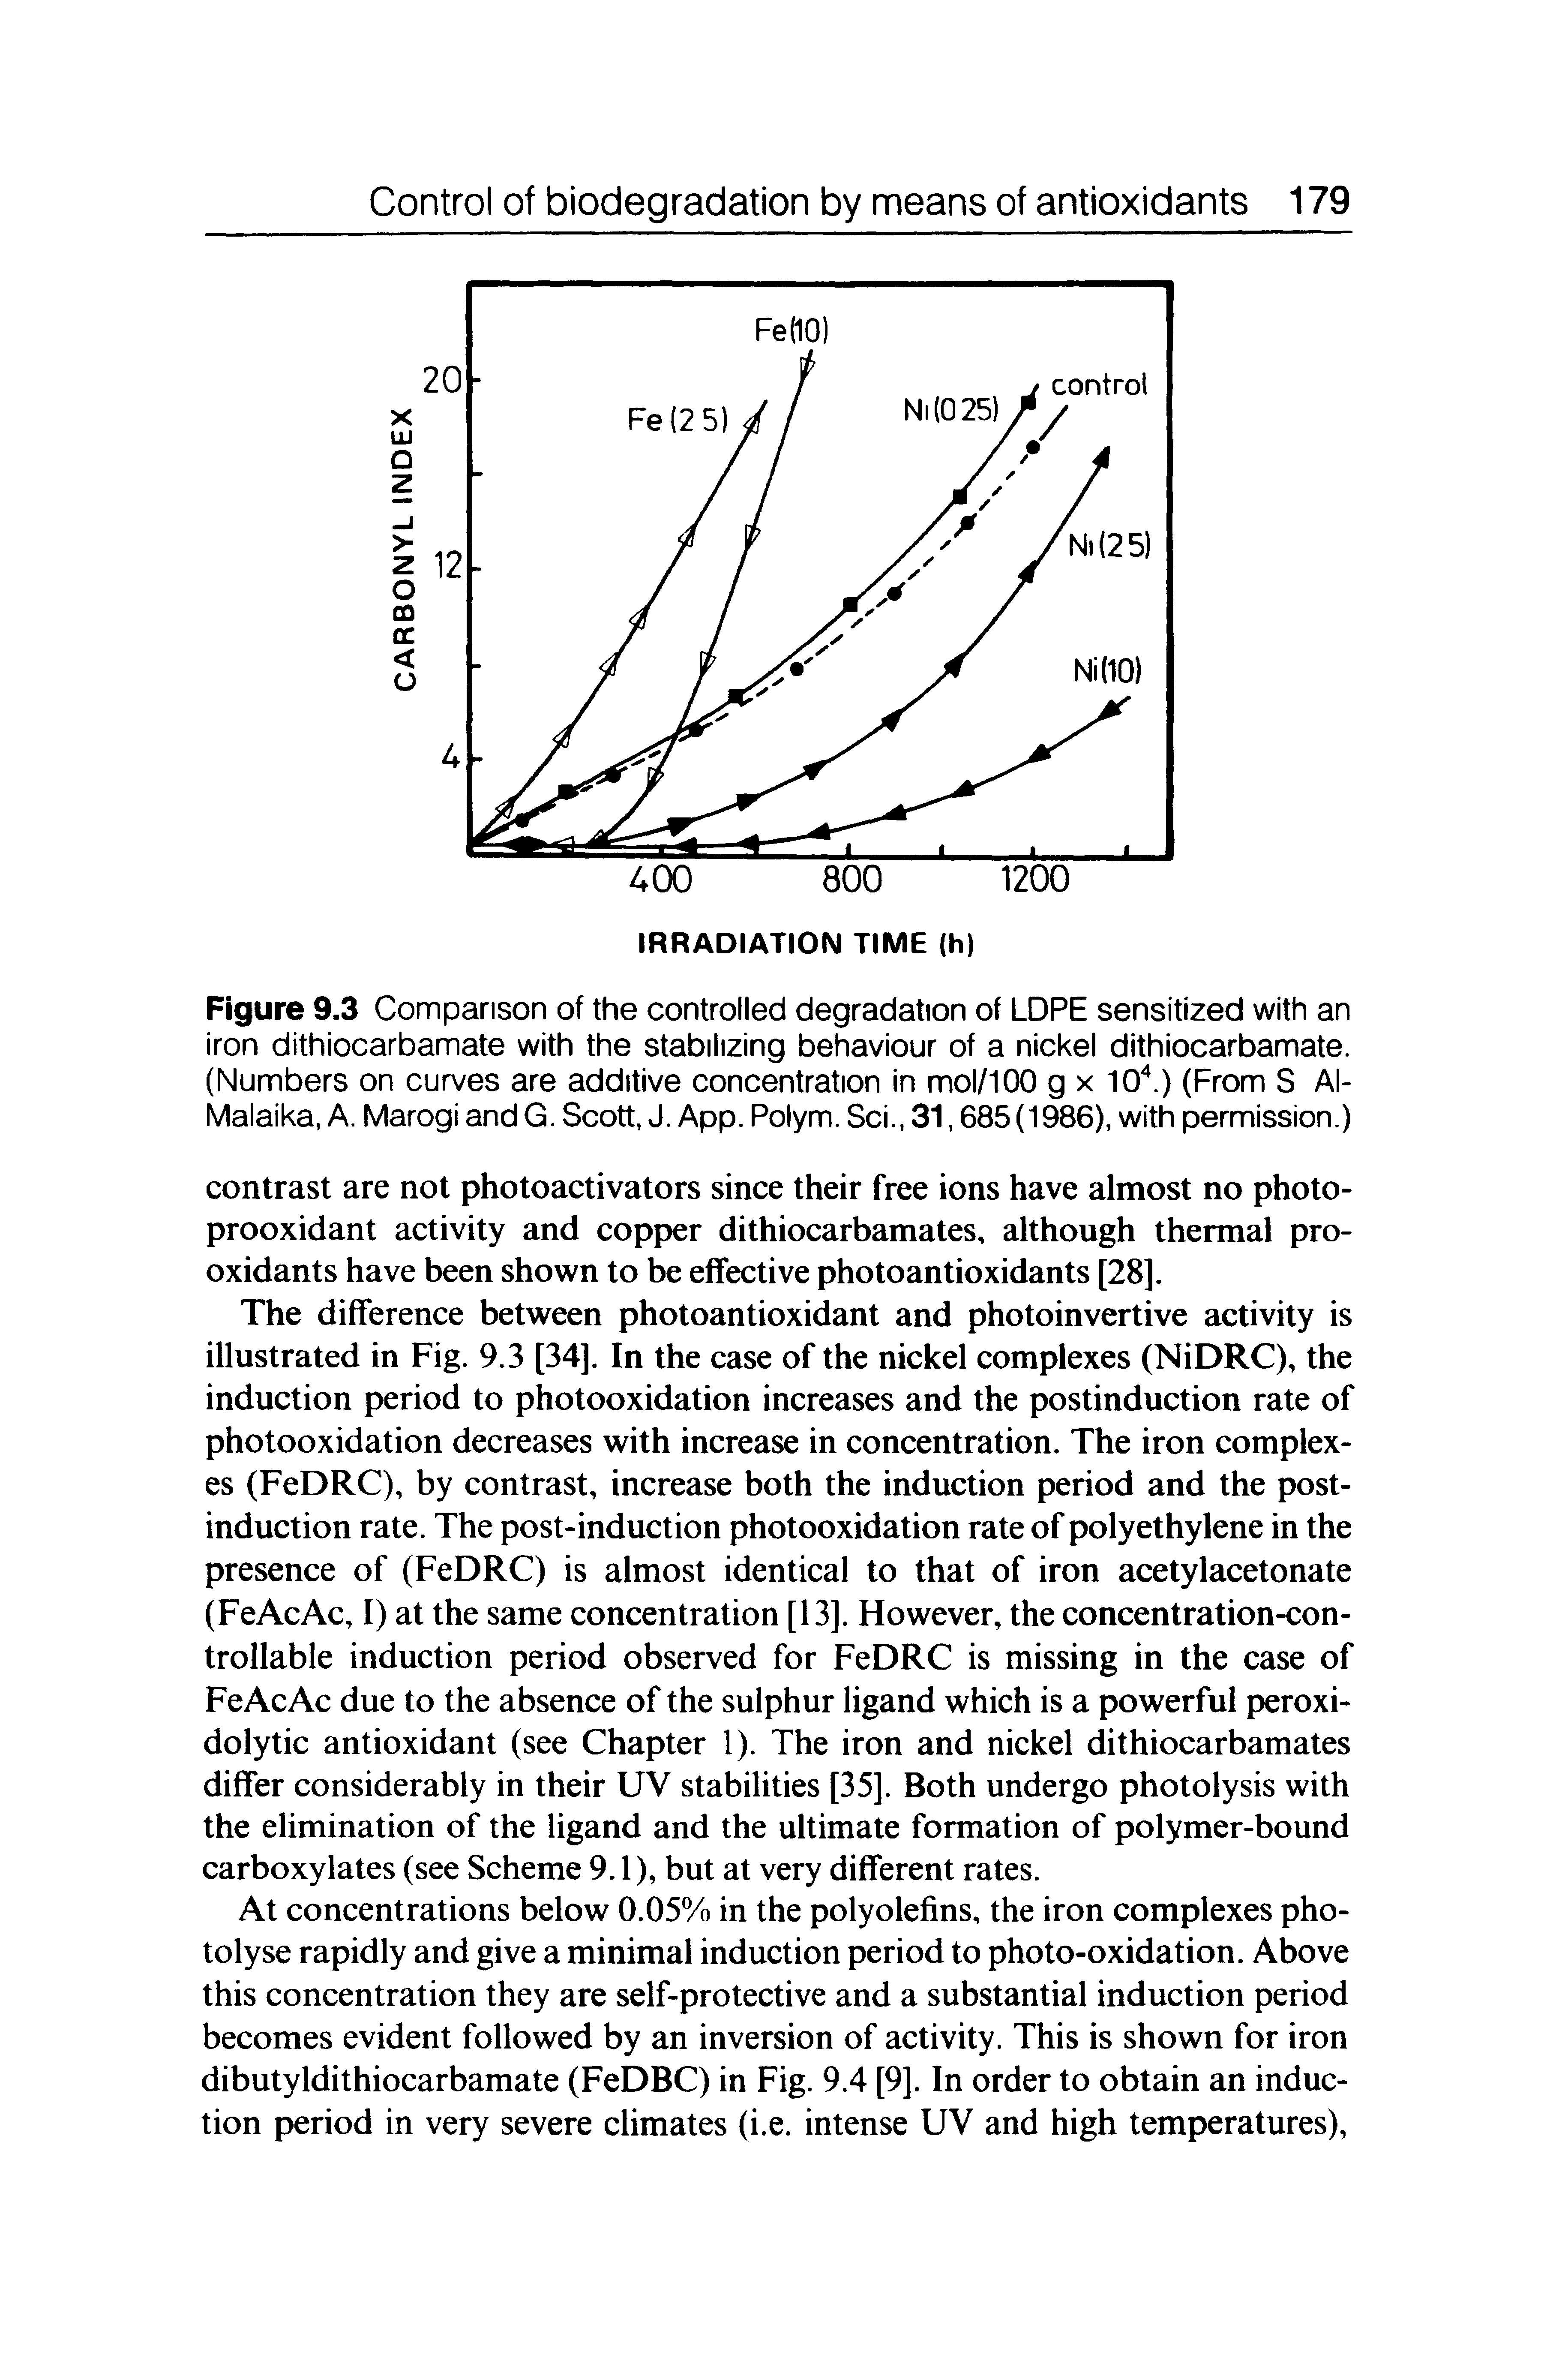 Figure 9.3 Comparison of the controlled degradation of LORE sensitized with an iron dithiocarbamate with the stabilizing behaviour of a nickel dithiocarbamate. (Numbers on curves are additive concentration in mol/100 g x 10". ) (From S Al-Malaika, A. Marogi and G. Scott, J. App. Polym. Sci., 31,685 (1986), with permission.)...